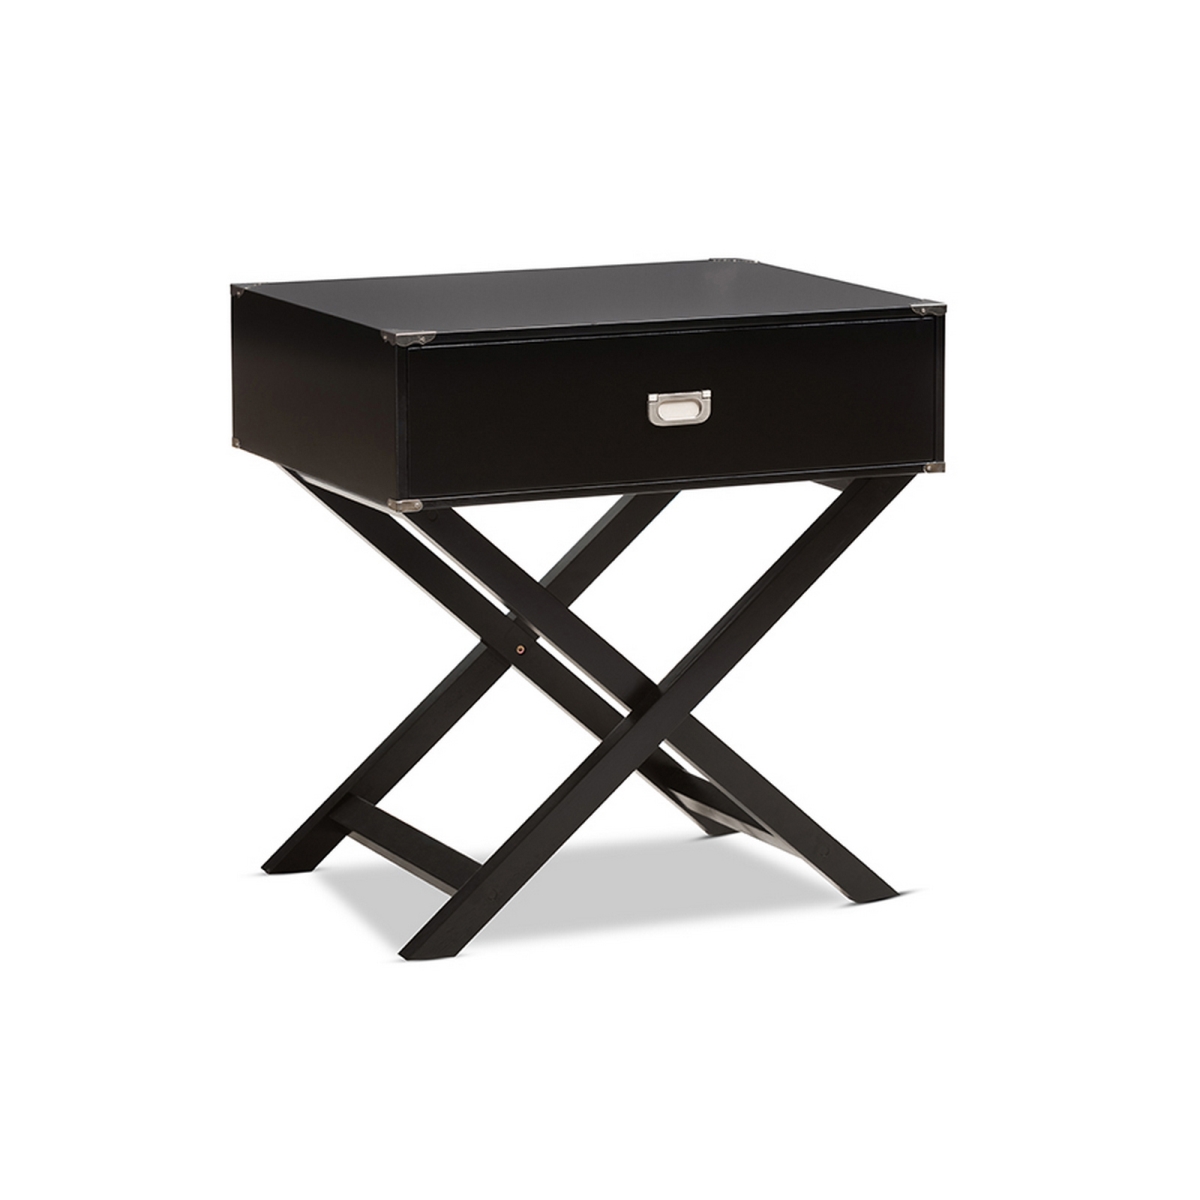 Urban Designs 370053 Curtice Modern & Contemporary Black Drawer Wooden Bedside Table - 27.9 X 25.9 X 20 In.